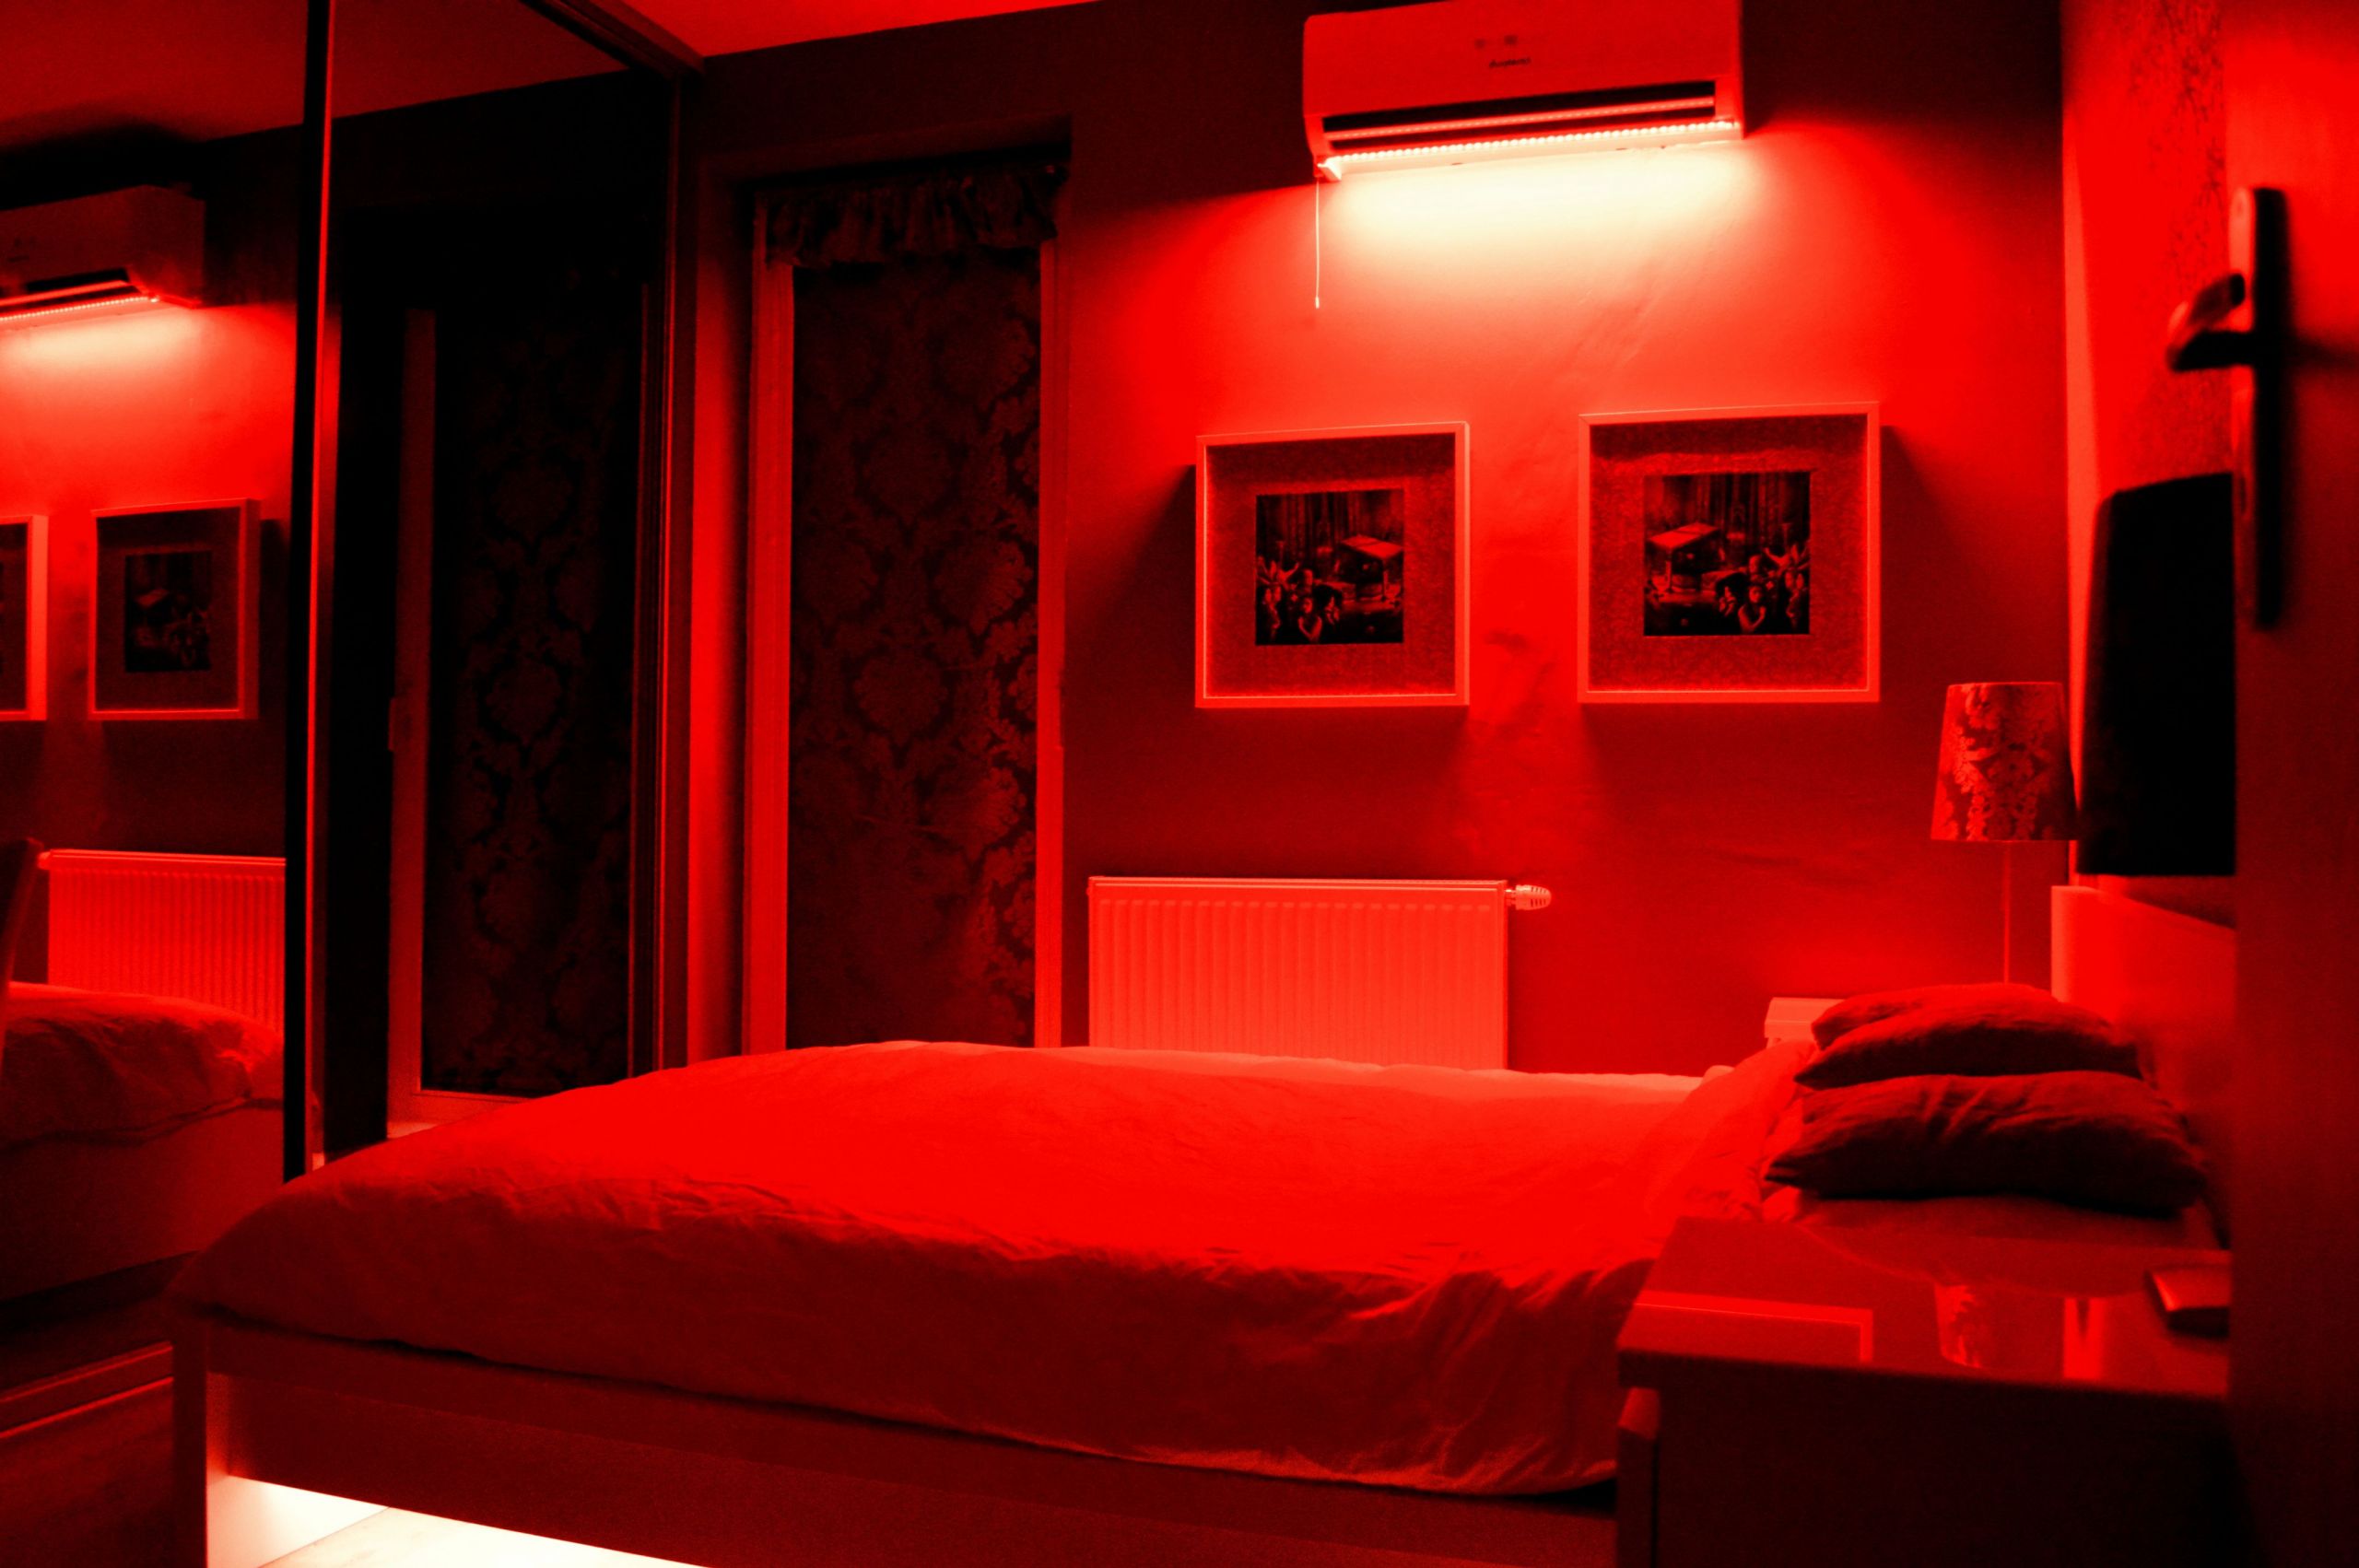 Red Light Bulb In Bedroom
 Brothel red classical bedroom with red light